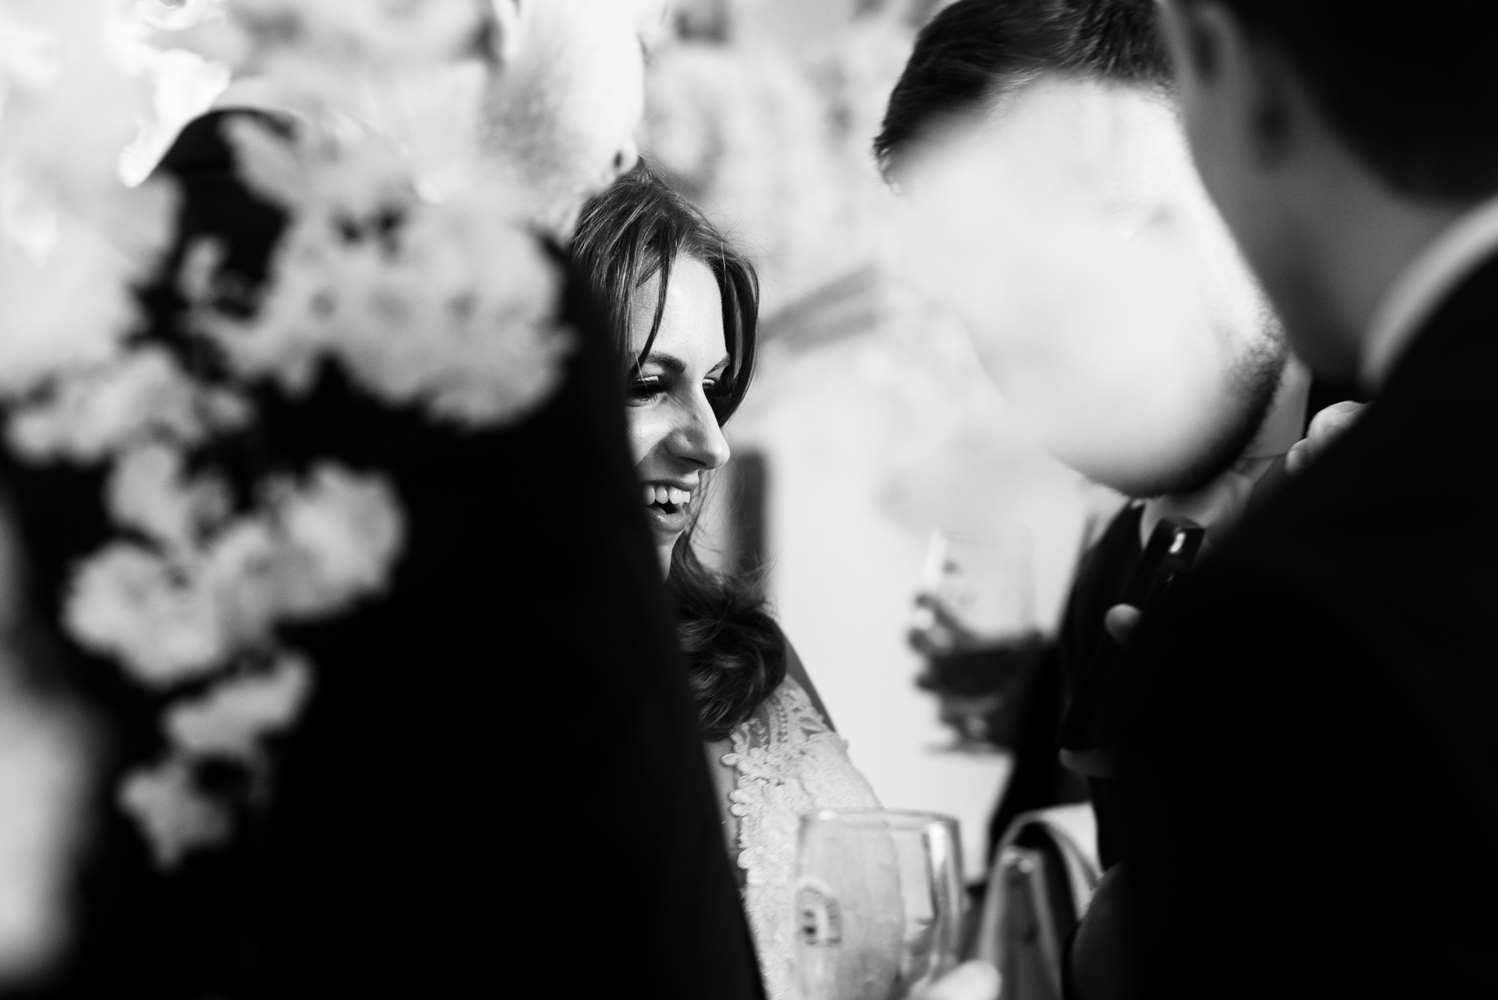 A black and white photo of the bride during the drinks reception